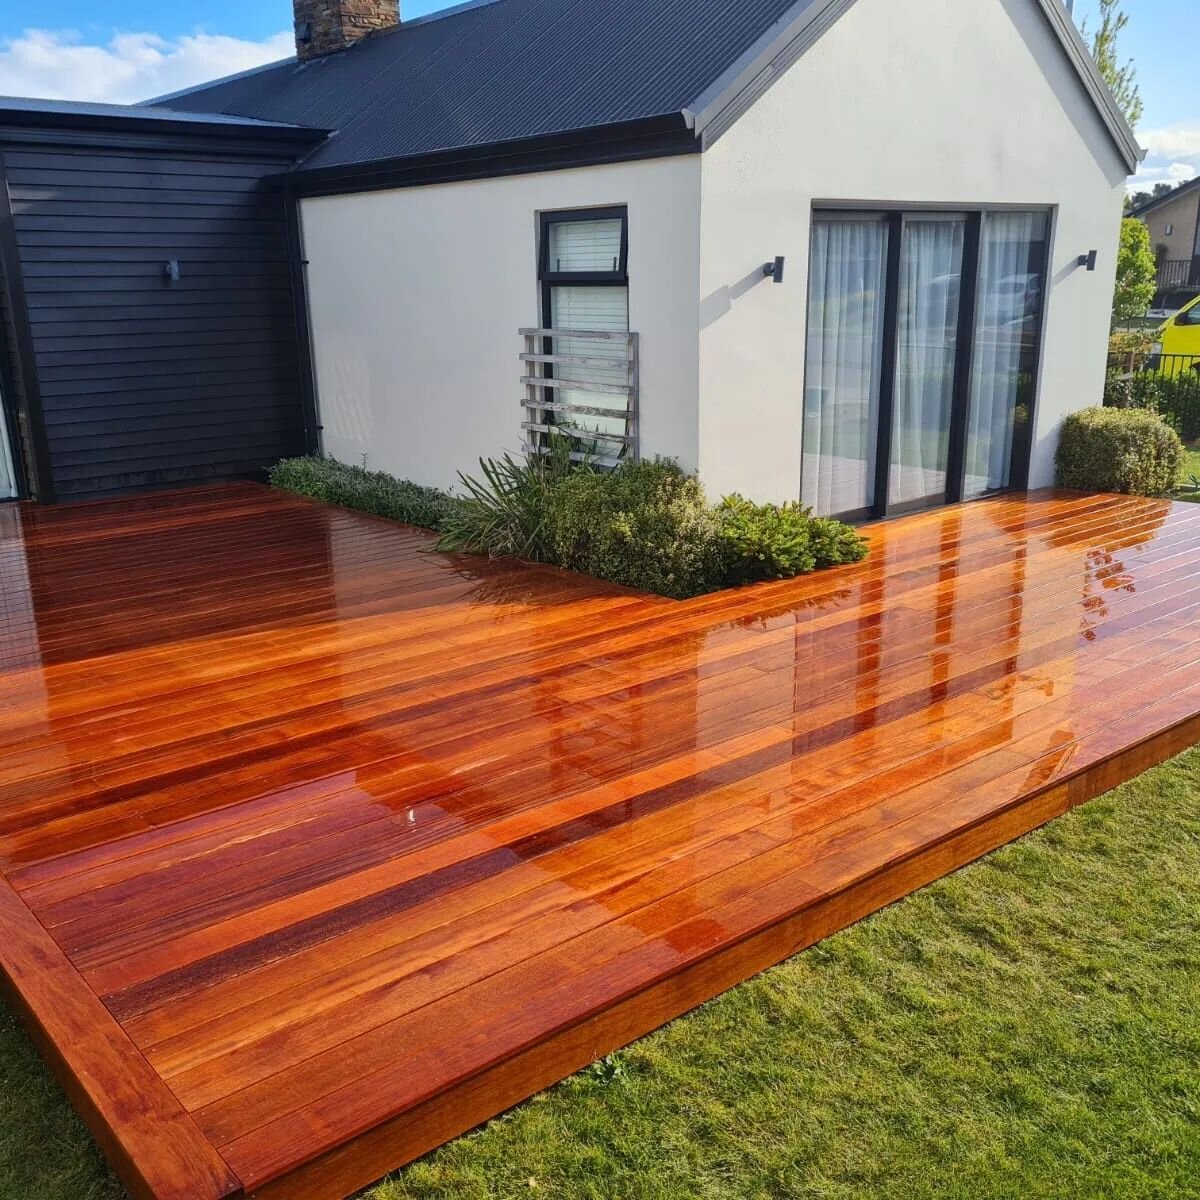 Adding value. This home was in need of a great livable deck. What a deck 😍 

#decks4u #decksbydesign #outdoors #improvement #value #add #topofthesouth #nzsmallbusiness #nelsontasman